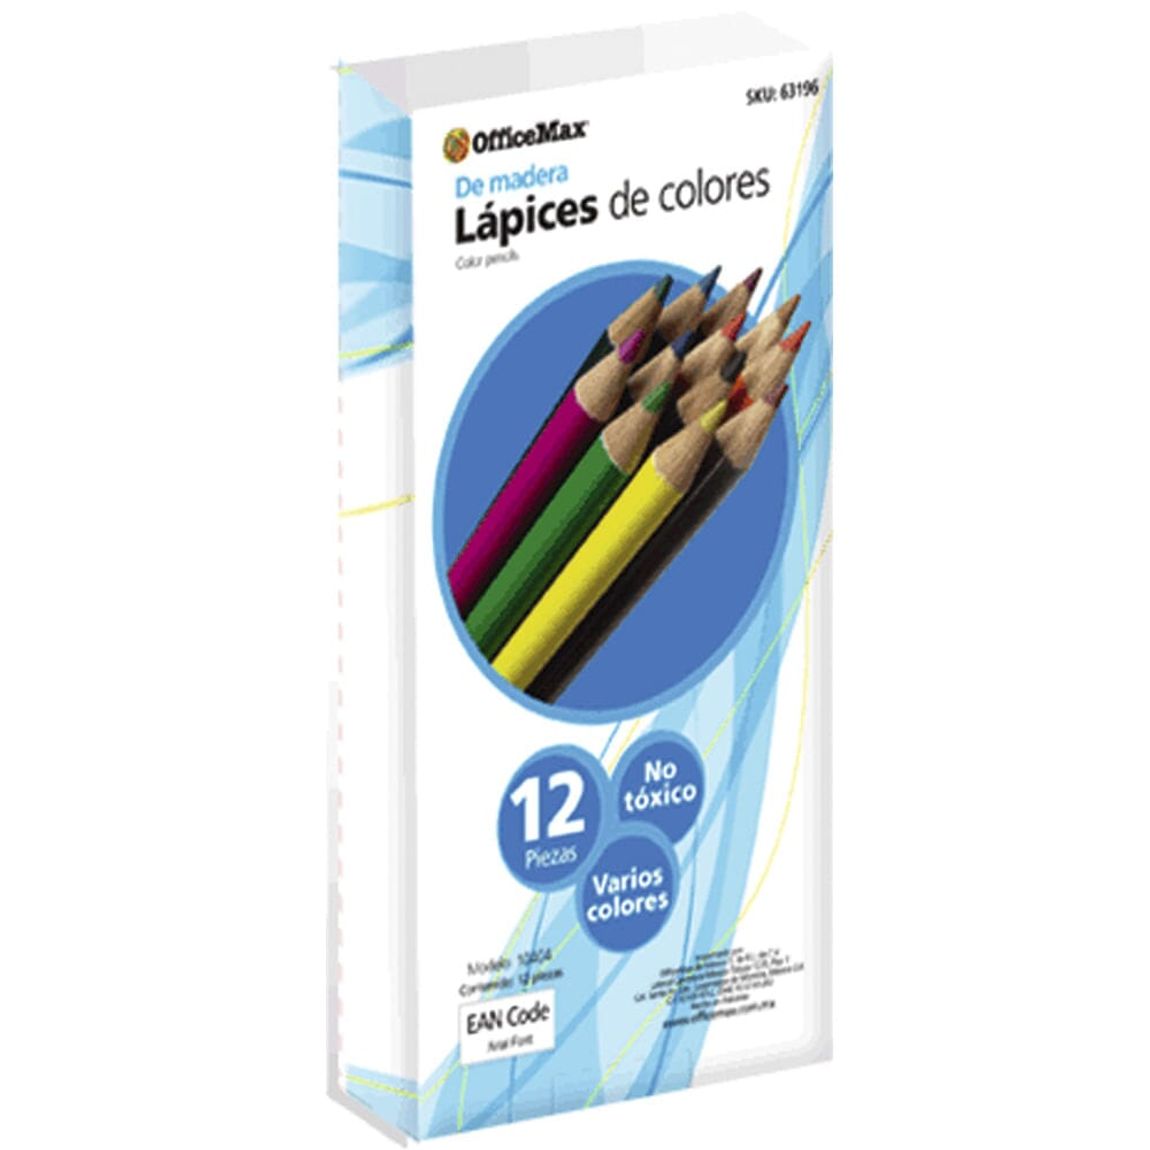 Total 32+ imagen colores office max